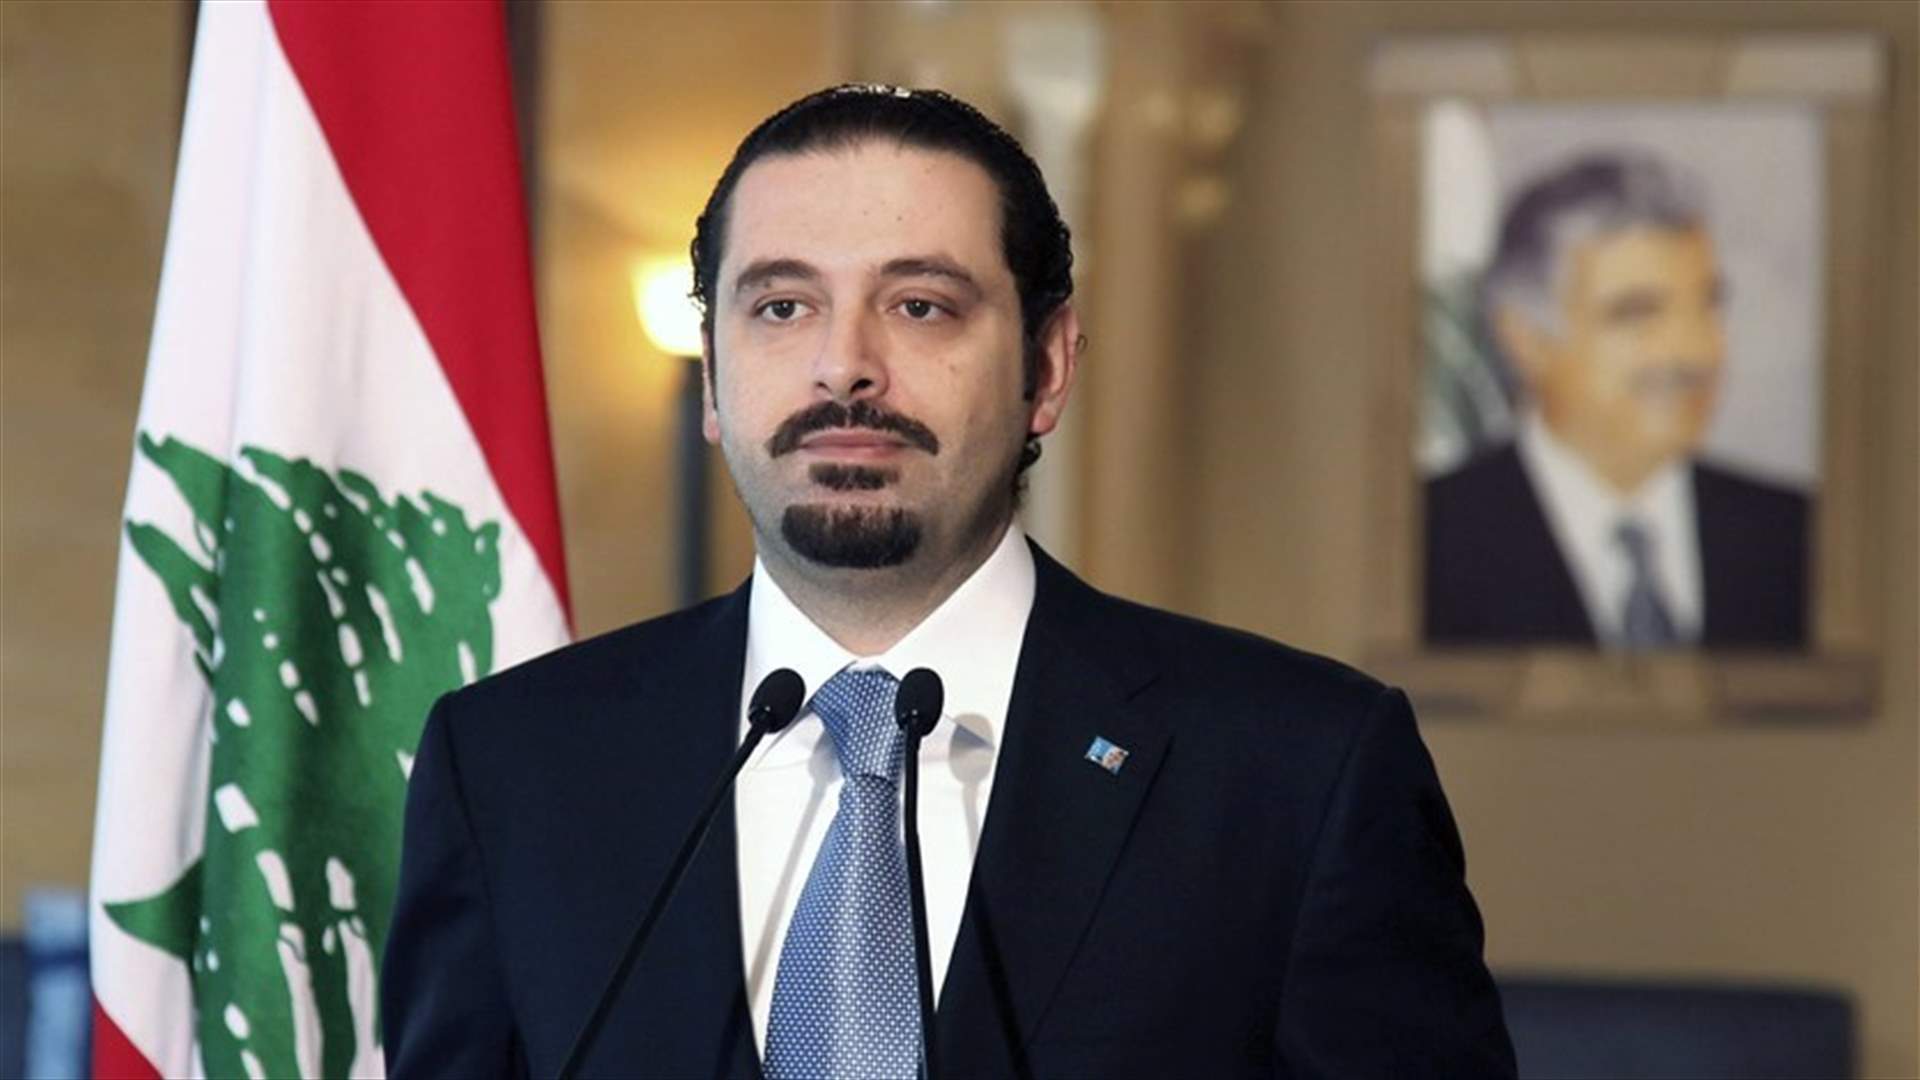 PM Hariri voices solidarity with British people after Manchester attack